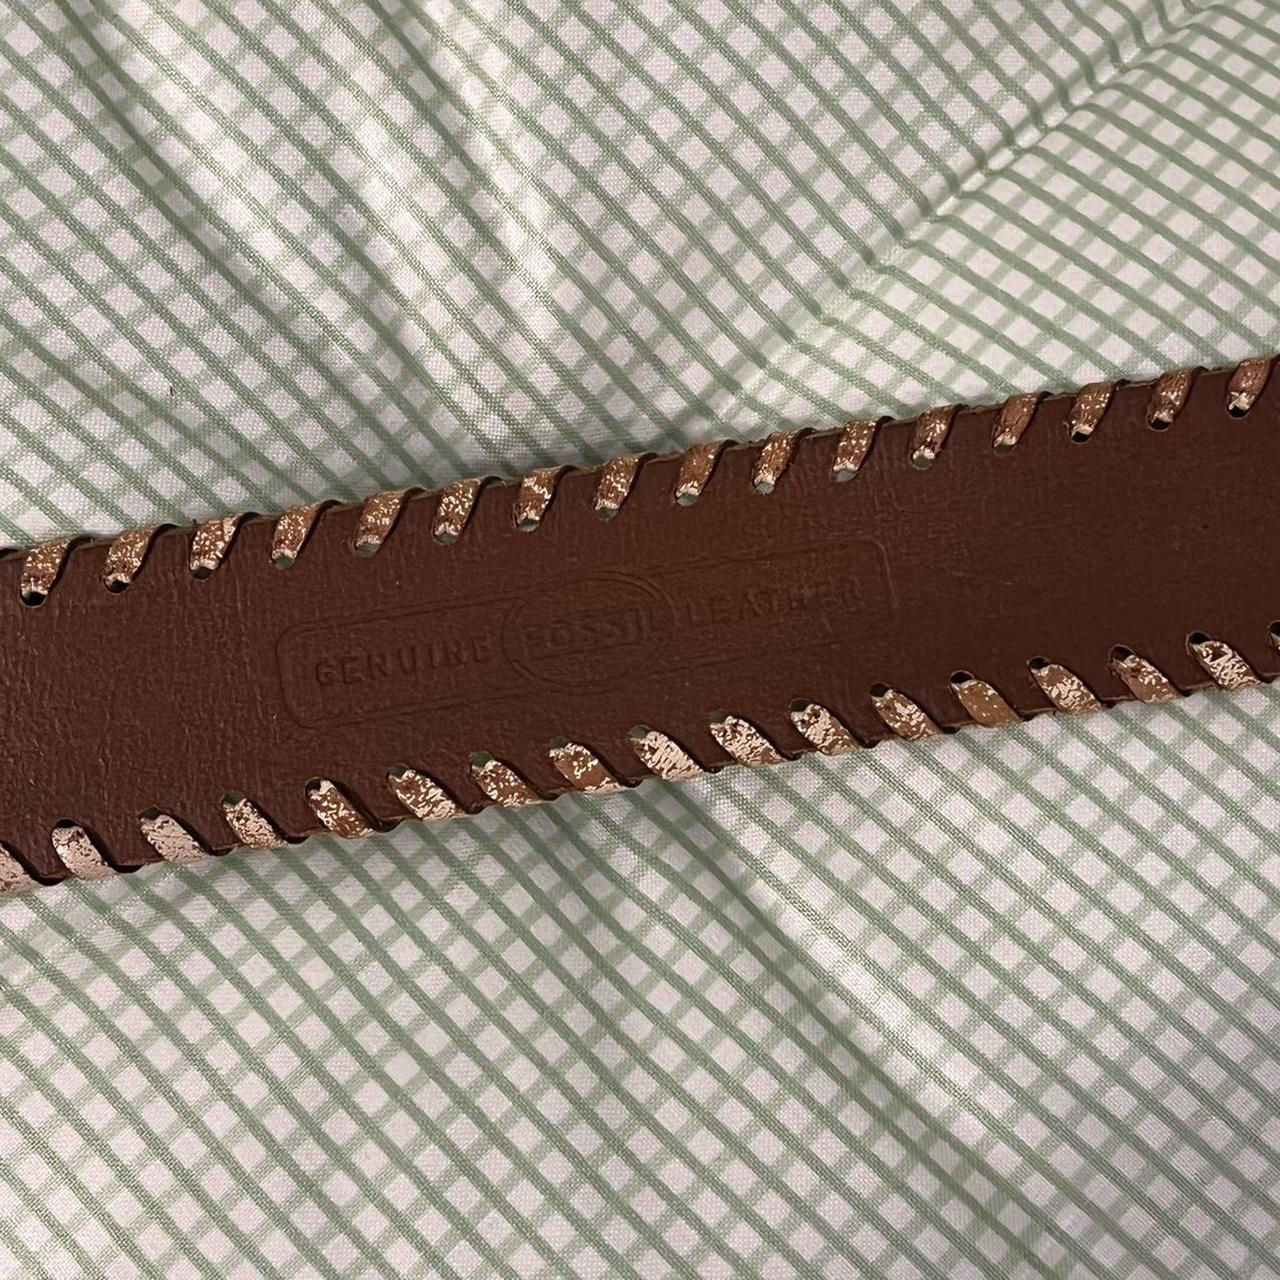 Fossil Women's Brown and Tan Belt (4)